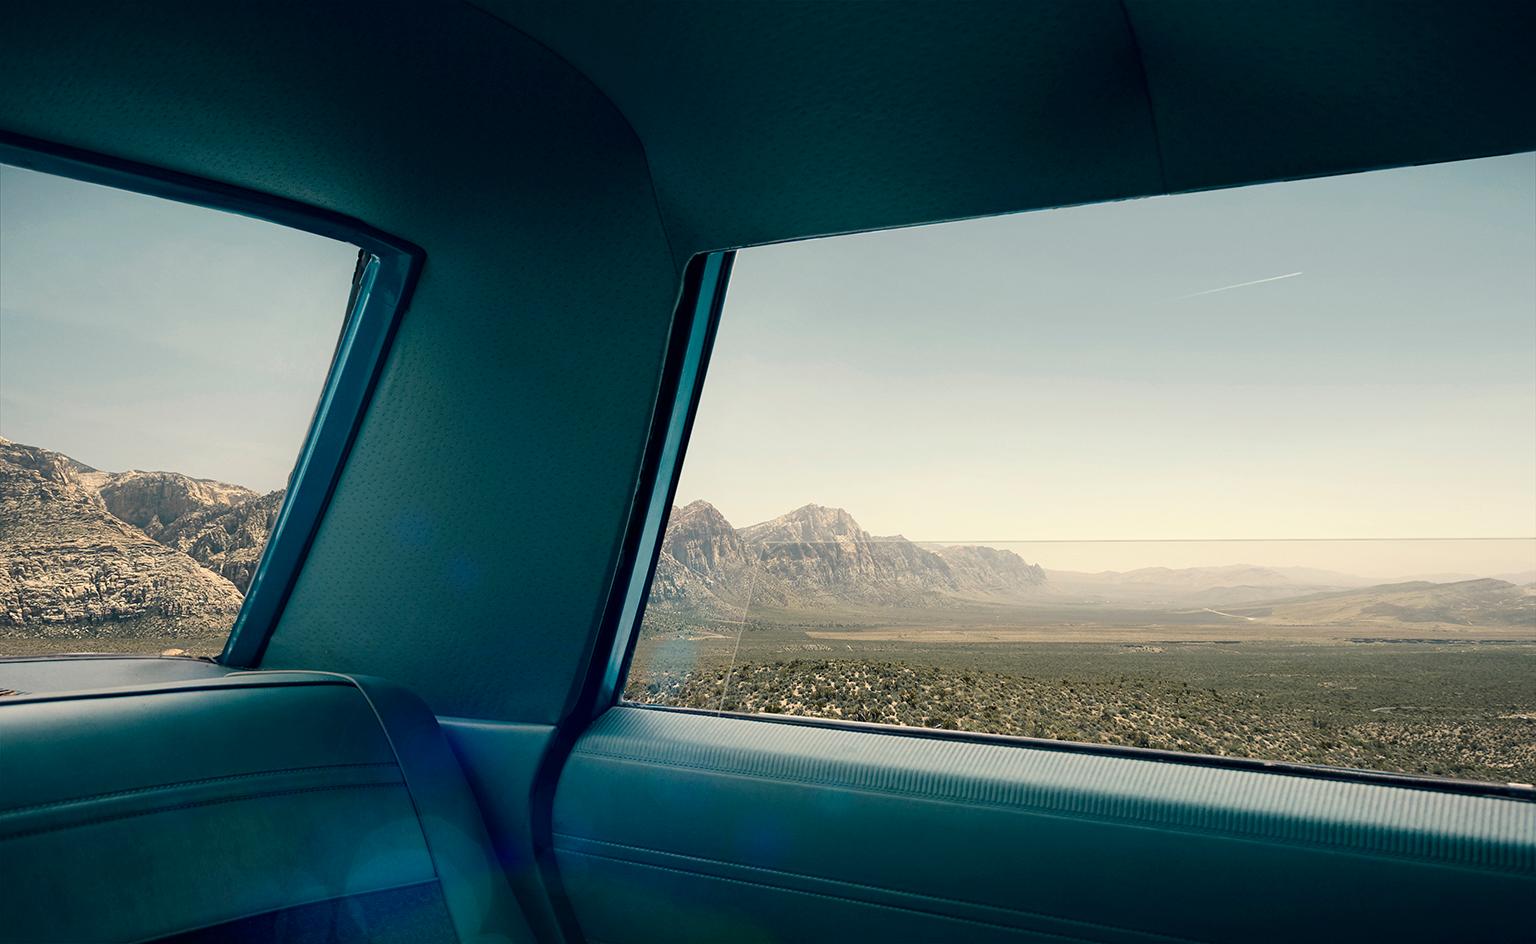 “Nevada”, Nevada, U.S.A., 2012. Dye Pigment Print. Edition of 10.
Signed, Dated and Numbered on the Reverse.

Tyler Gray’s photographs are cinematic in their storytelling. They are those moments that transform and become completely surreal in nature.